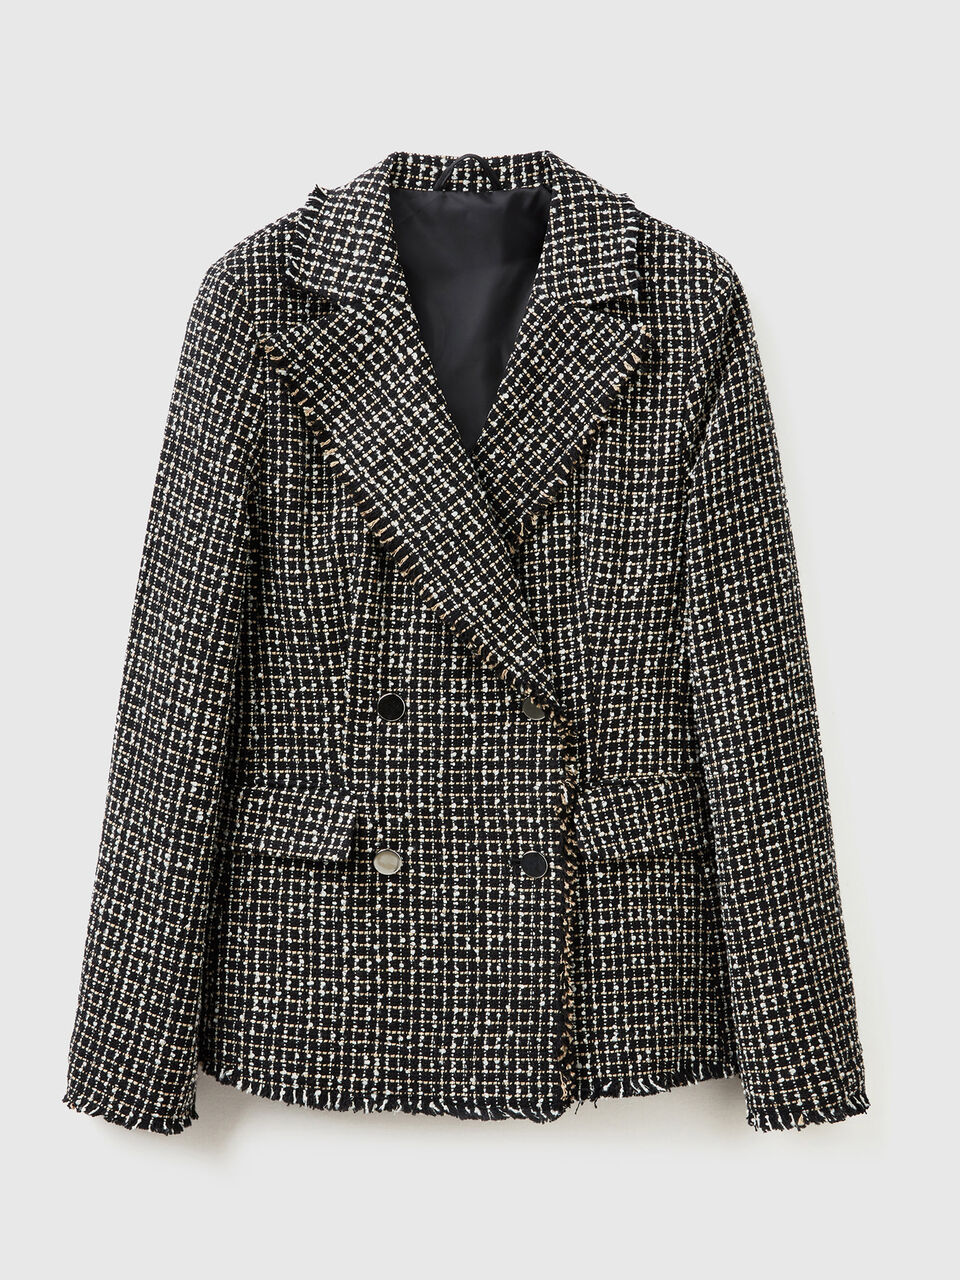 Double Breasted Houndstooth Blazer in Black